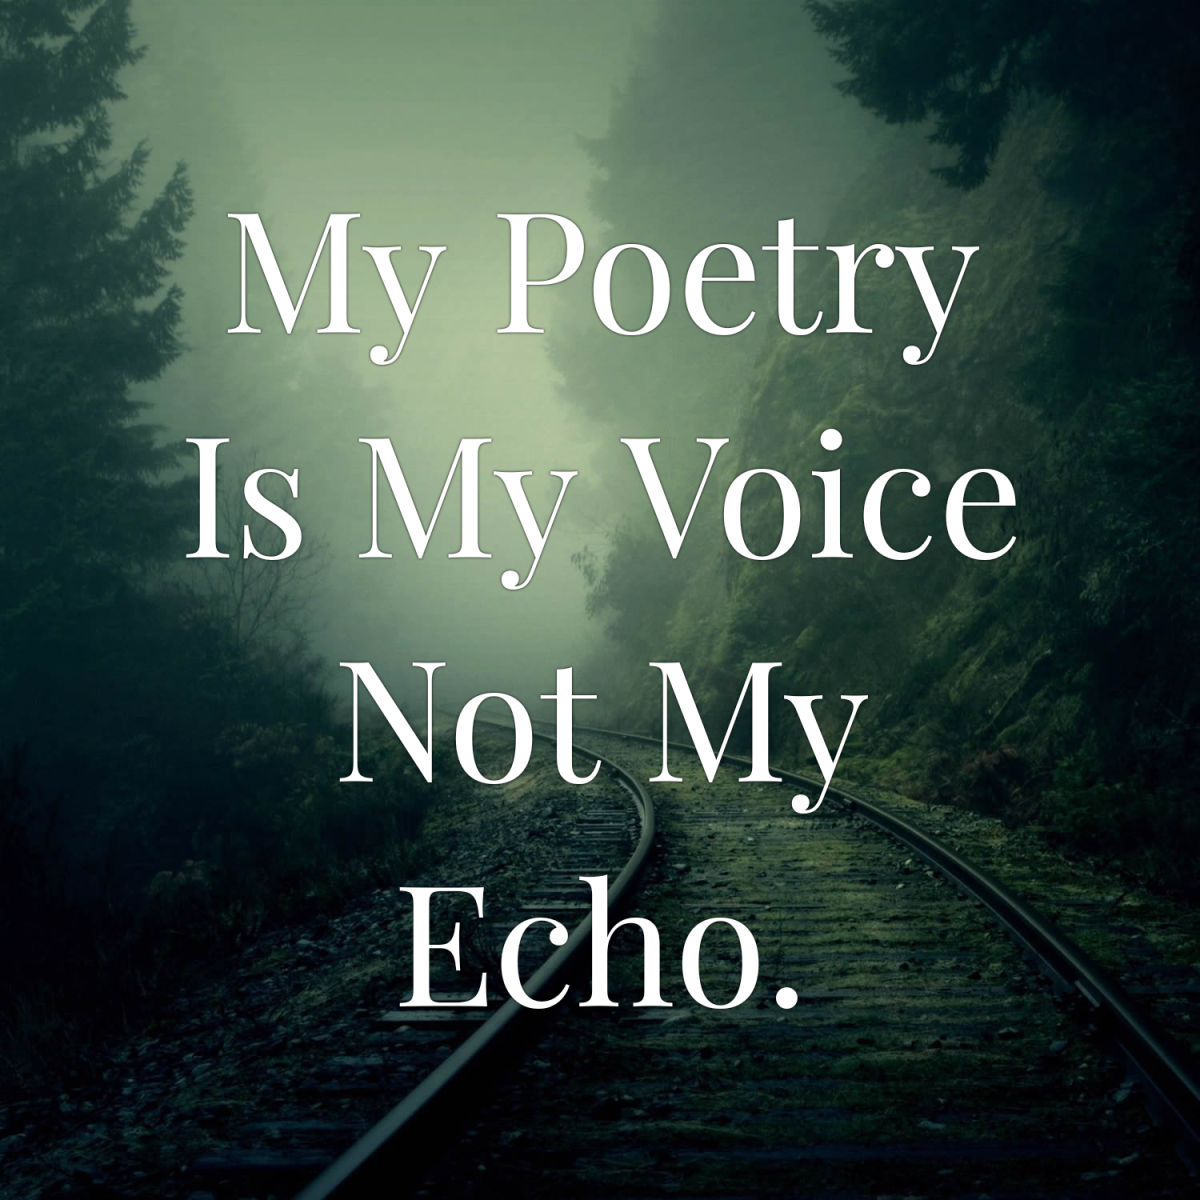 My Poetry Is My Voice Not My Echo.